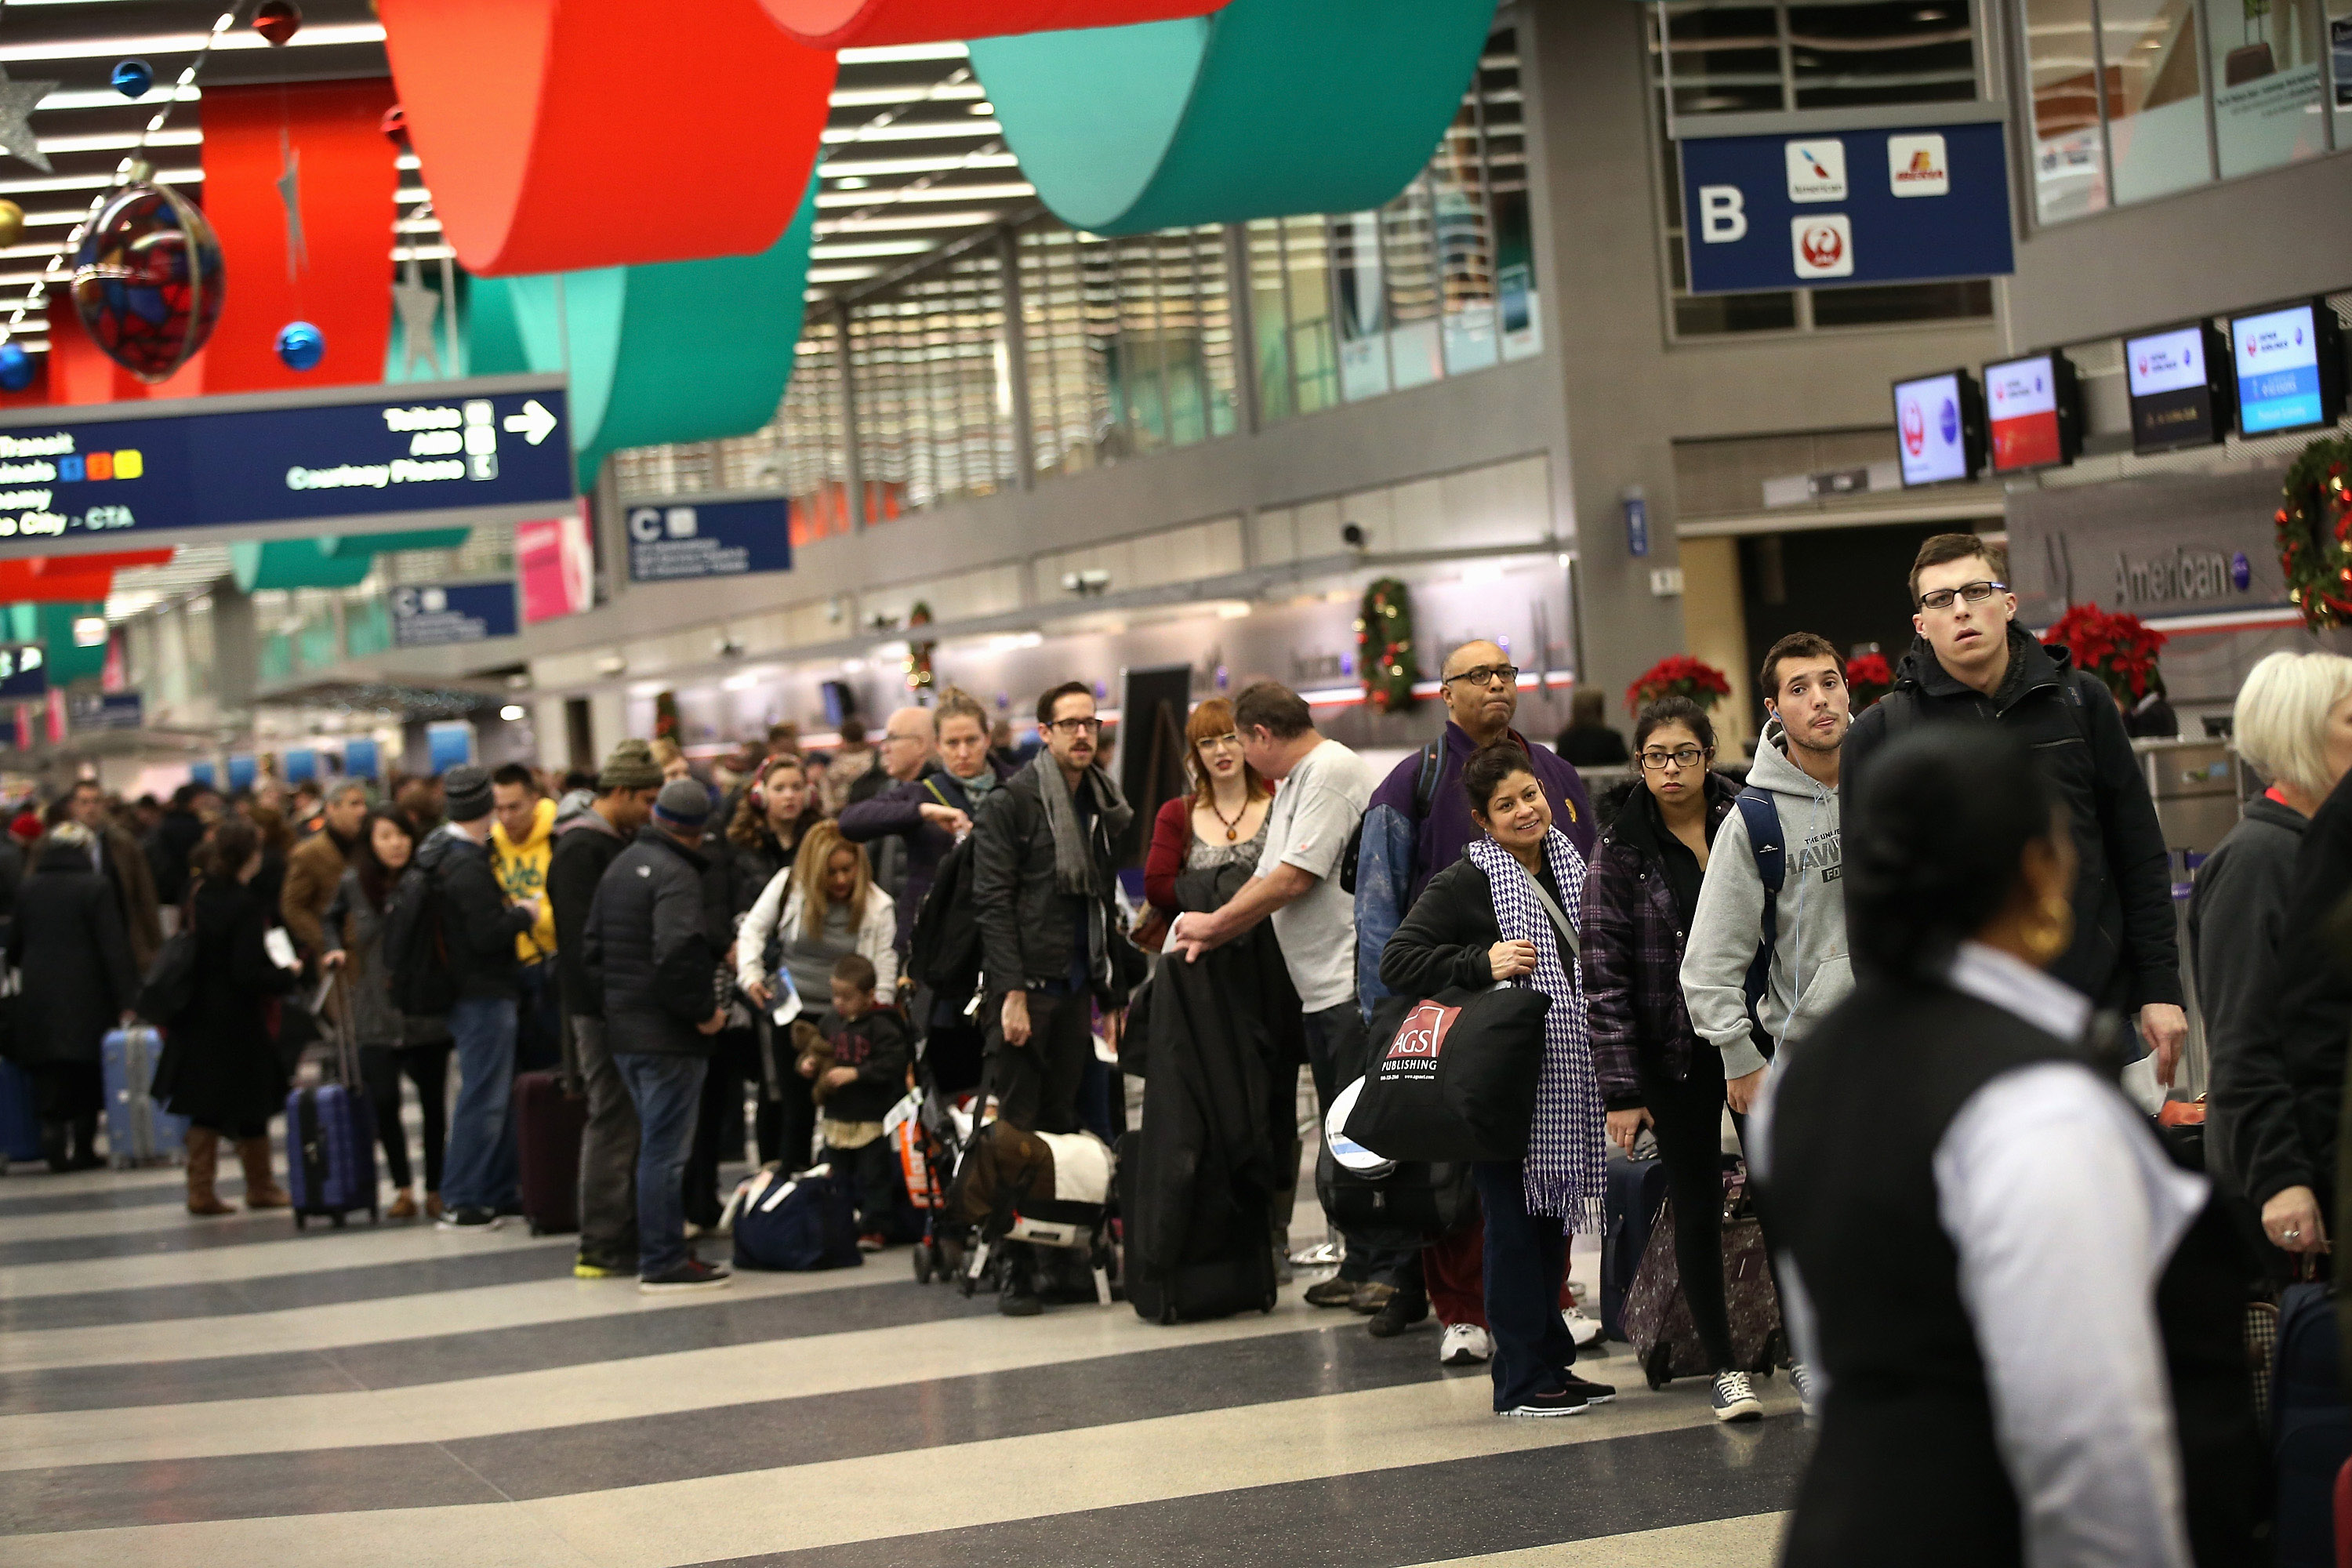 Travelers wait in line to check-in for flights at O'Hare International Airport on December 20, 2013 in Chicago, Illinois. (Scott Olson&mdash;Getty Images)